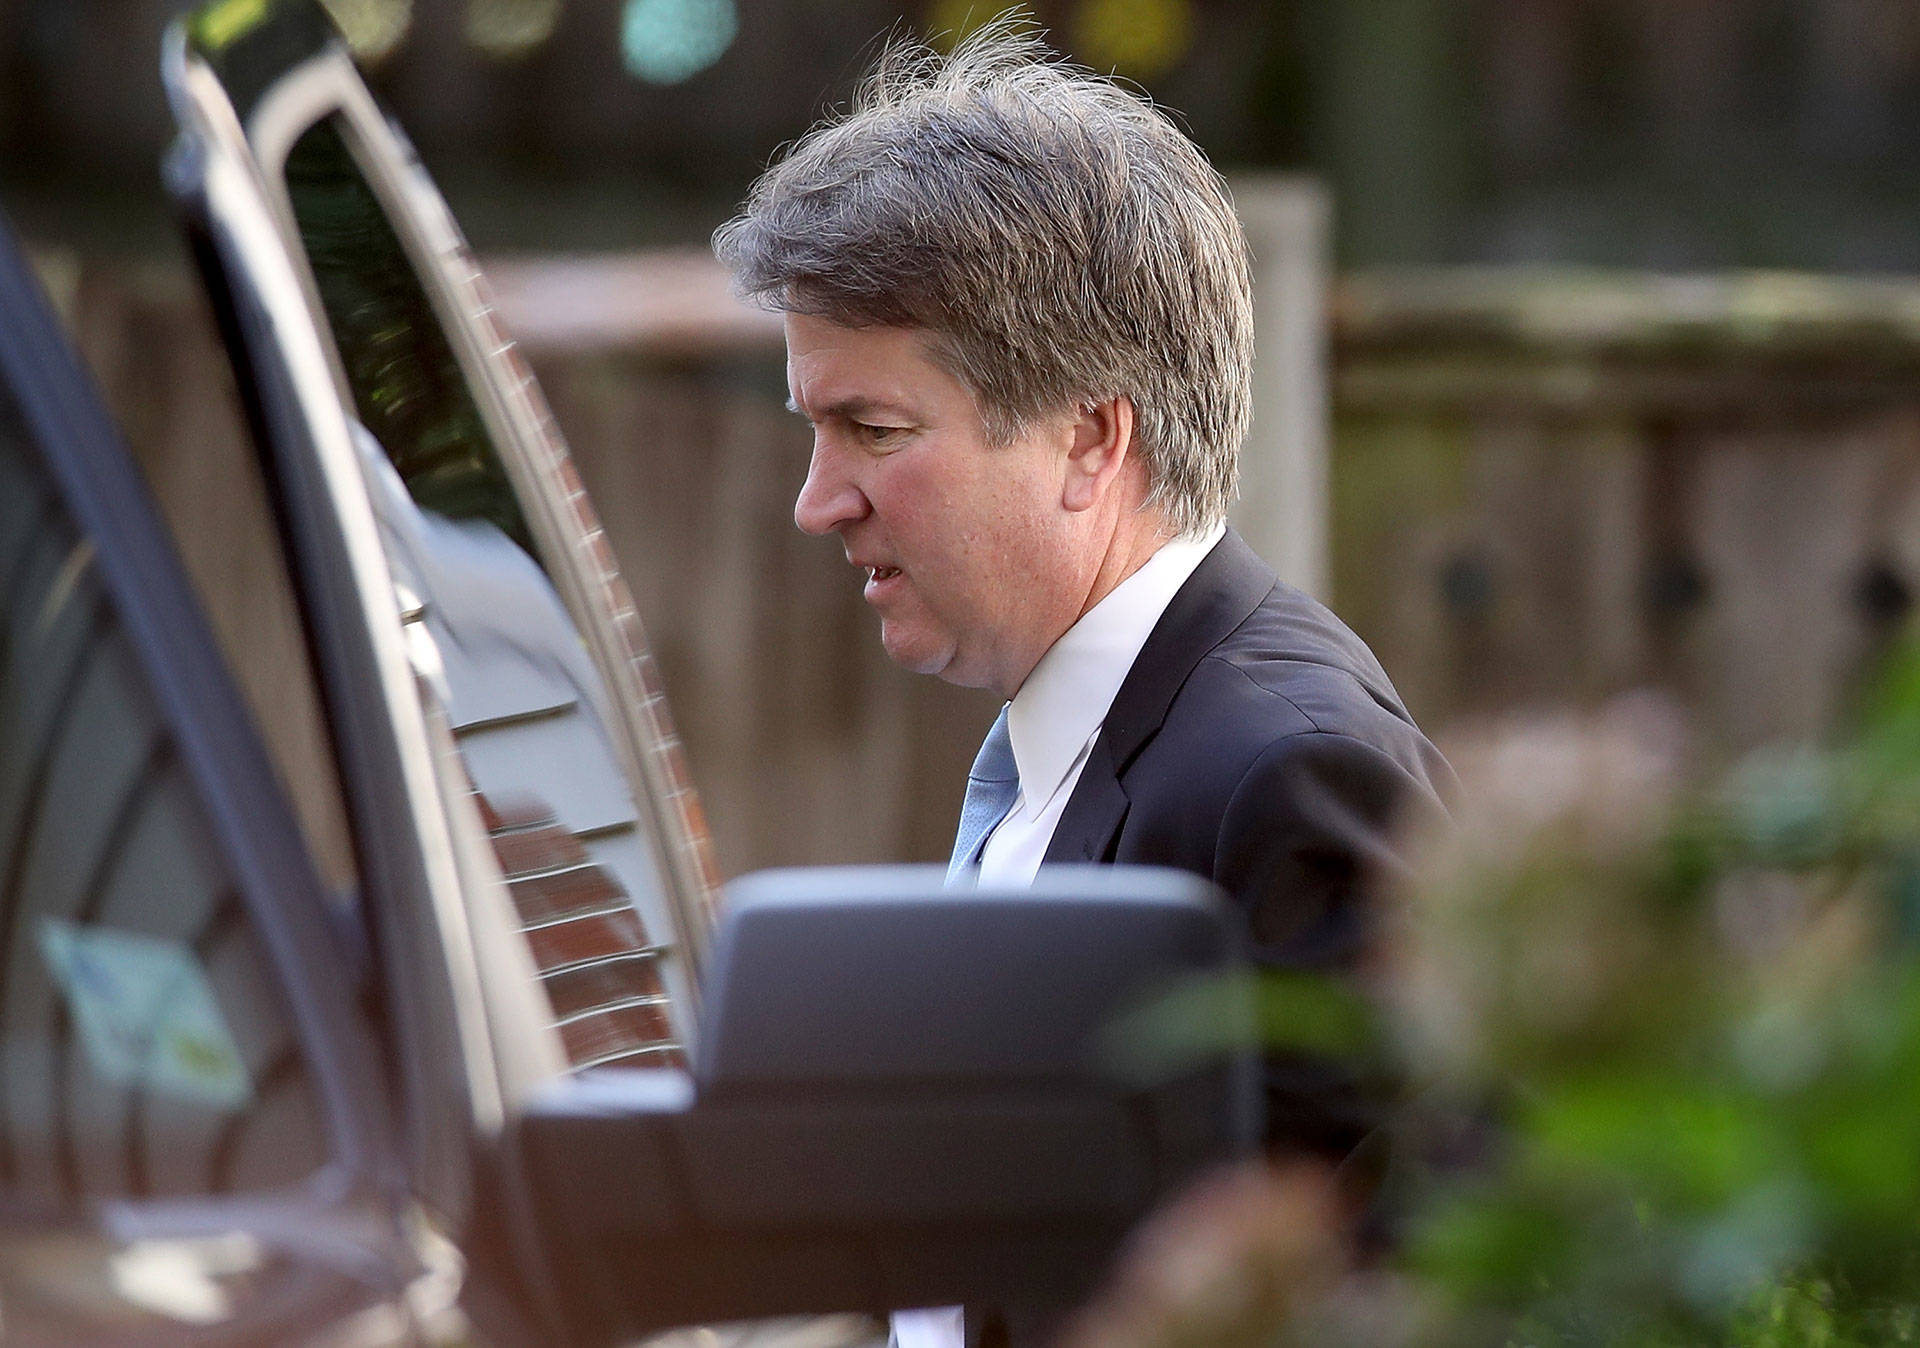 Supreme Court nominee Judge Brett Kavanaugh leaves his home on Sept. 19 in Chevy Chase, Maryland. Win McNamee/Getty Images